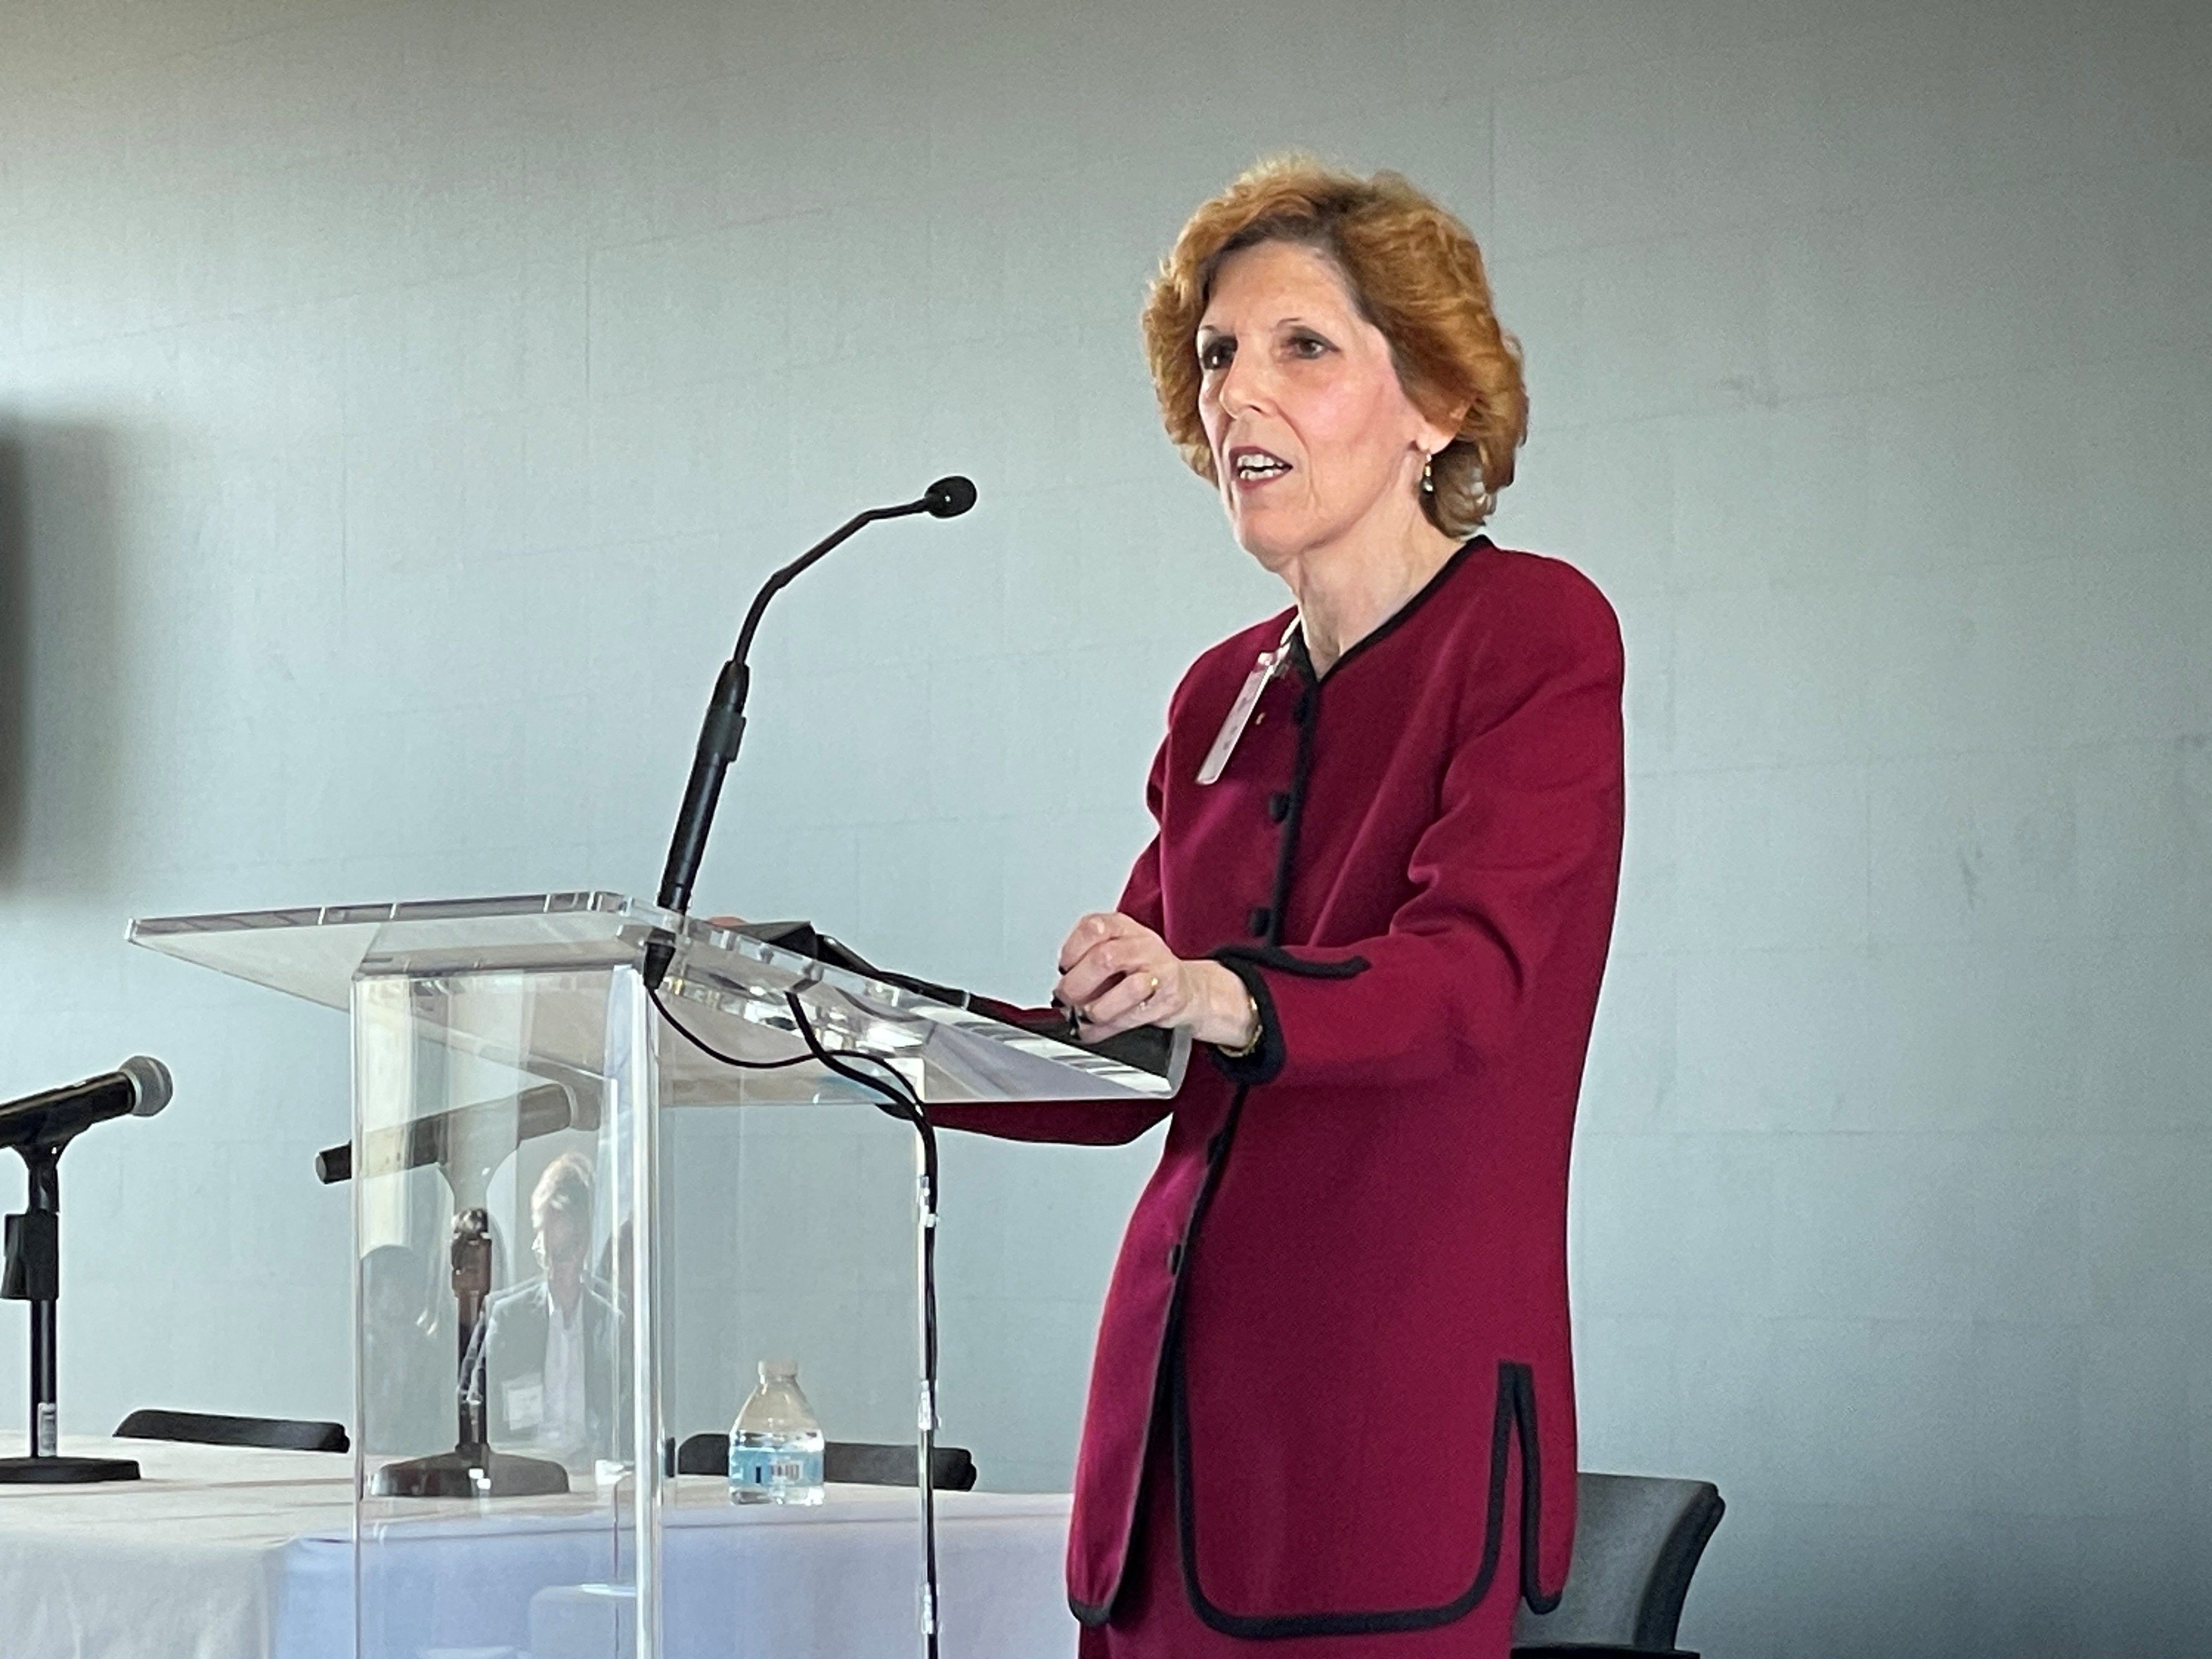 Loretta J. Mester speaks at a conference at Columbia University in New York